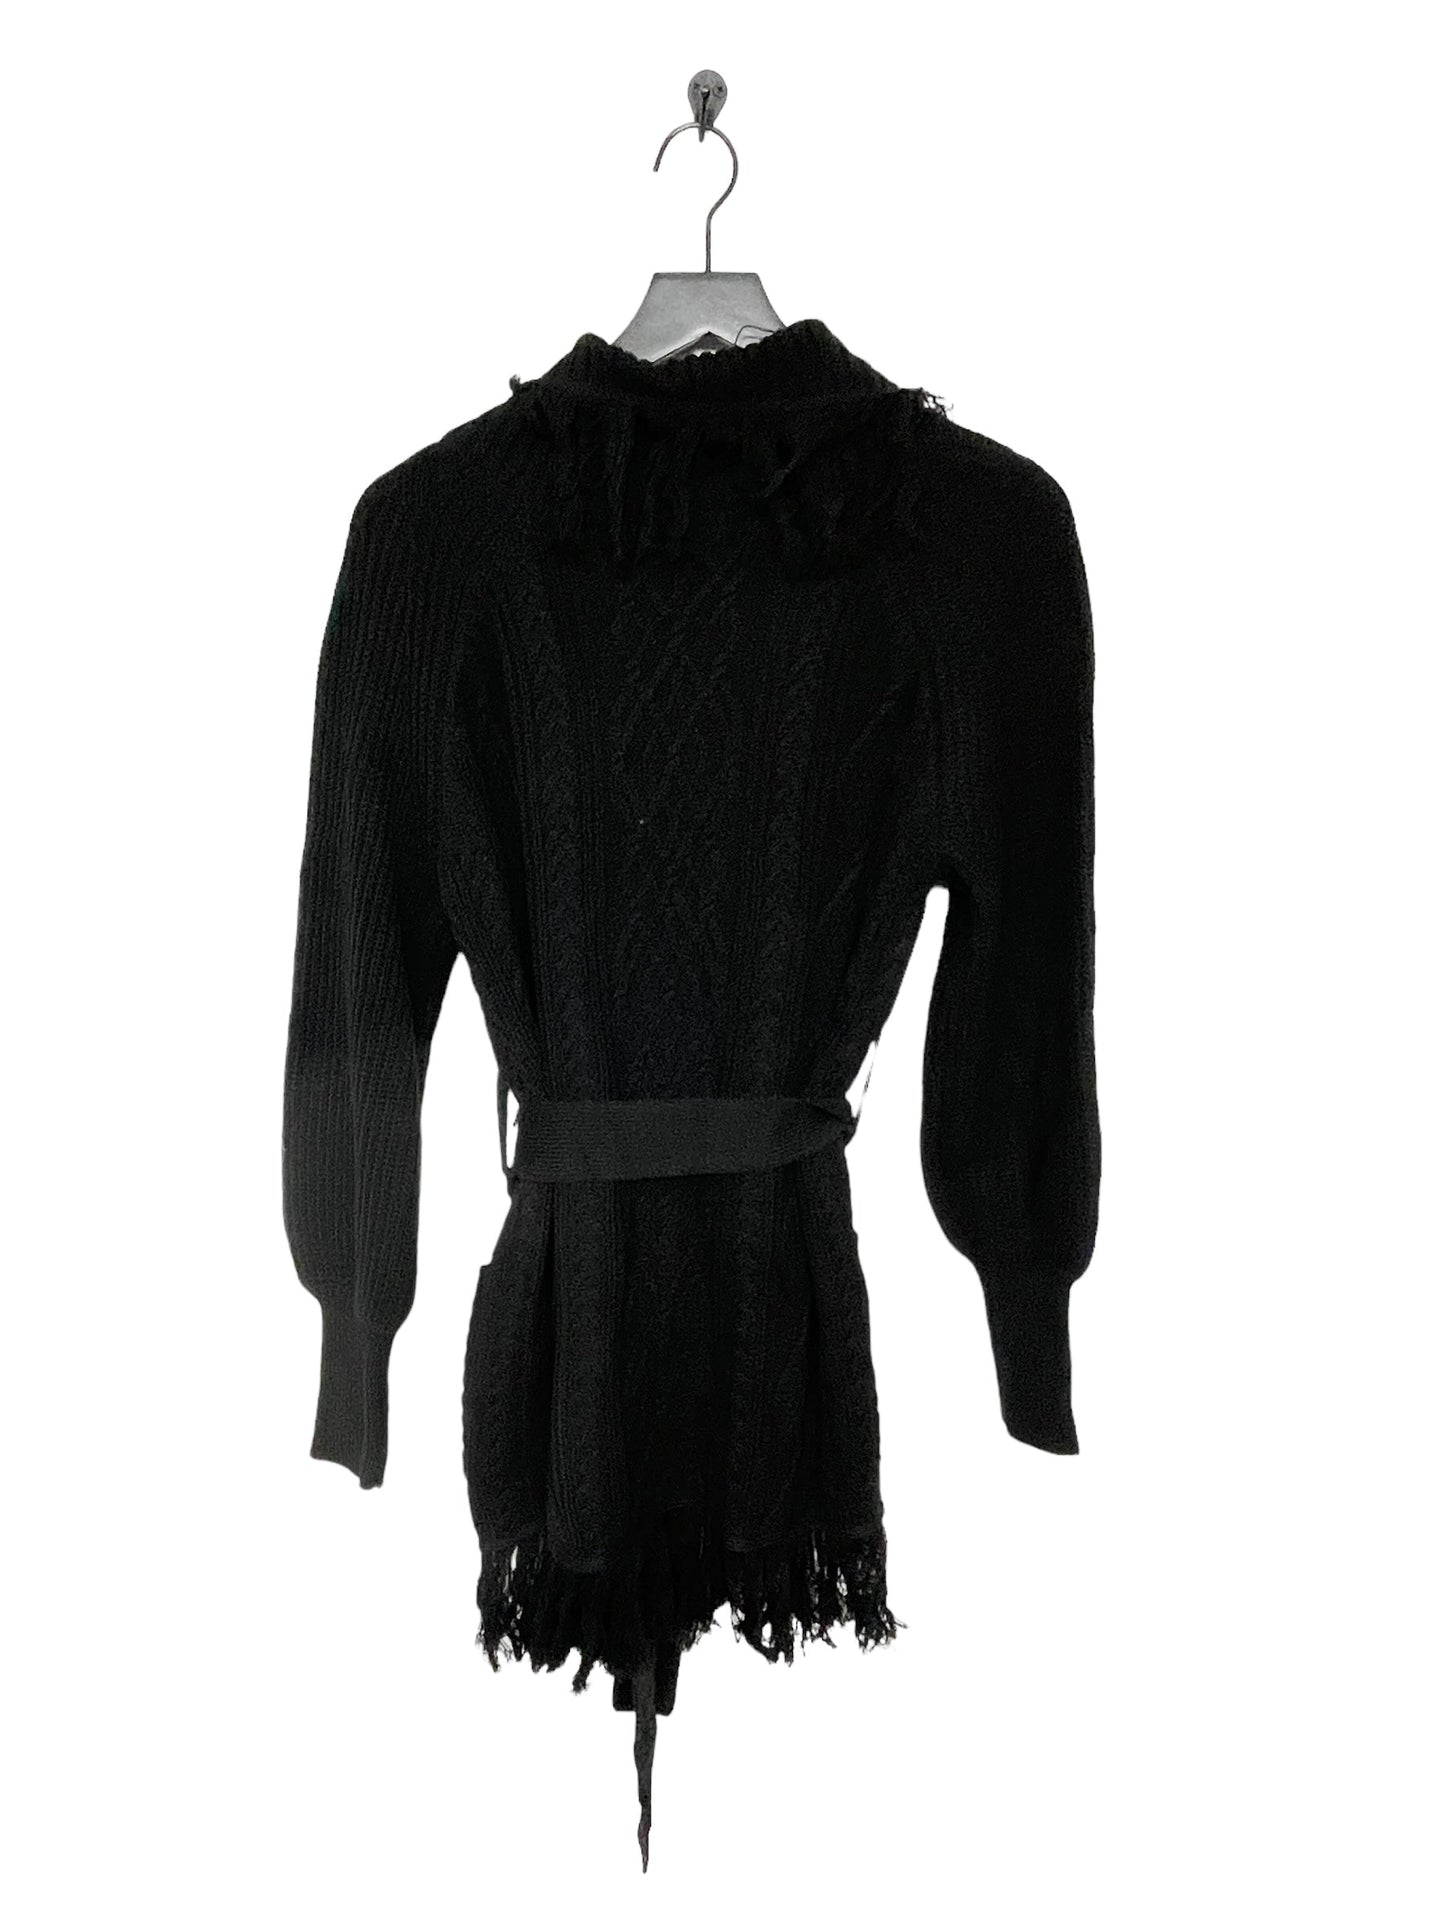 Black Sweater Cardigan Olivaceous, Size S